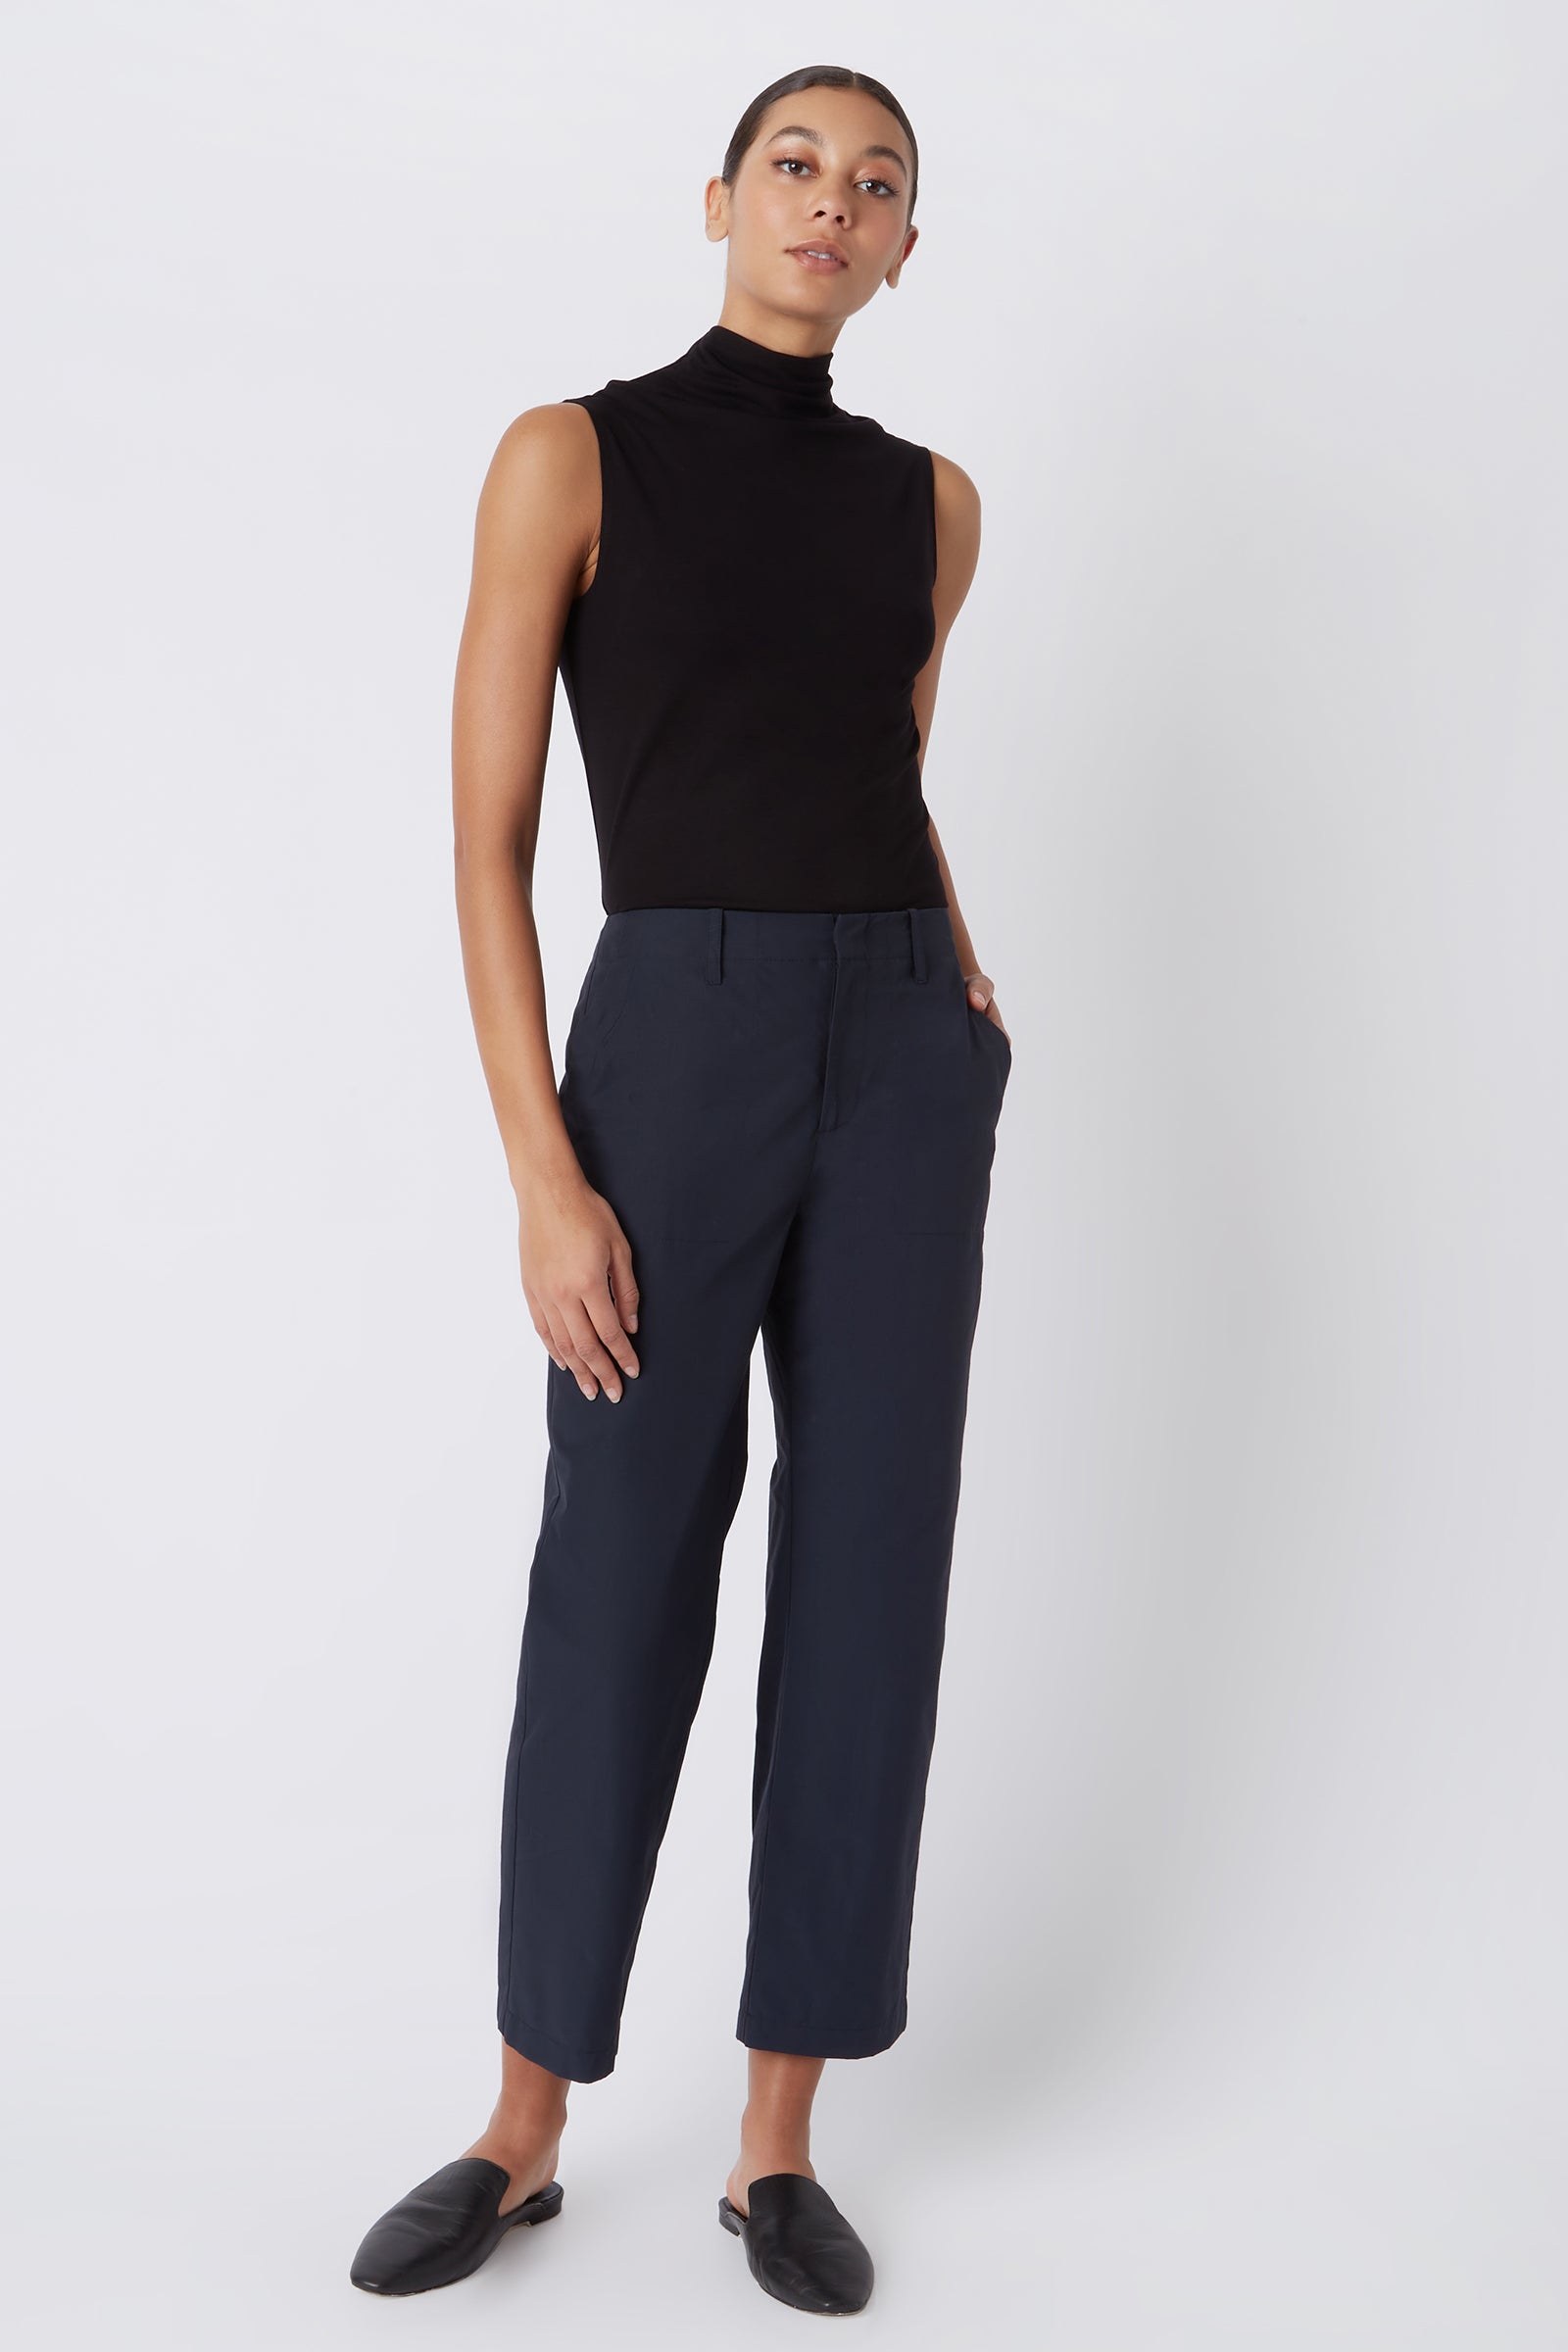 Kal Rieman Francoise Cigarette Pant in Navy Italian Broadcloth on Model with Hand in Pocket Full Front View